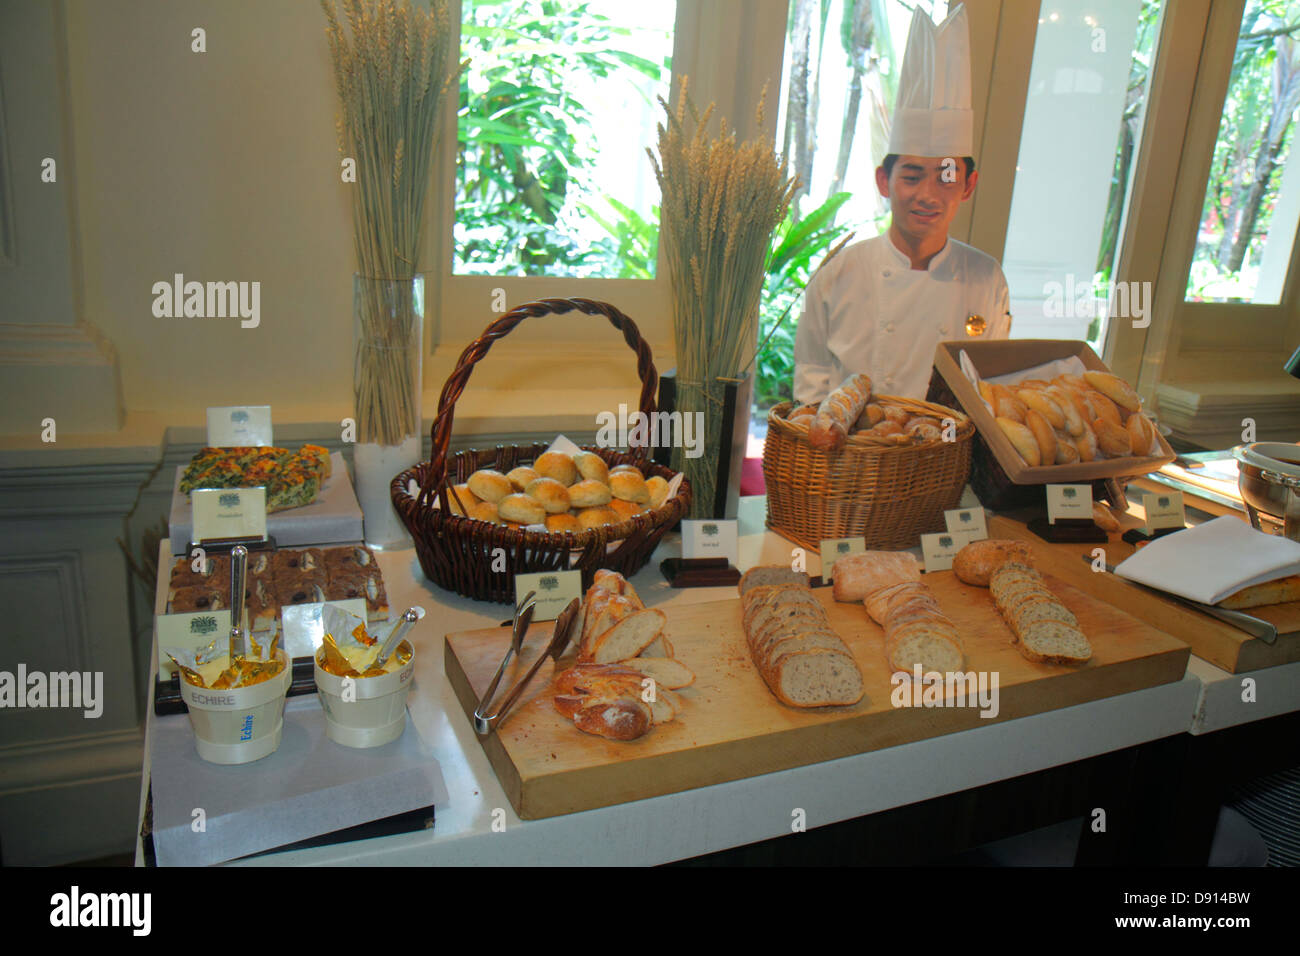 Singapore,Raffles,hotel,restaurant restaurants food dining cafe cafes,buffet style table,Asian man men male,baker,chef,employee worker workers working Stock Photo